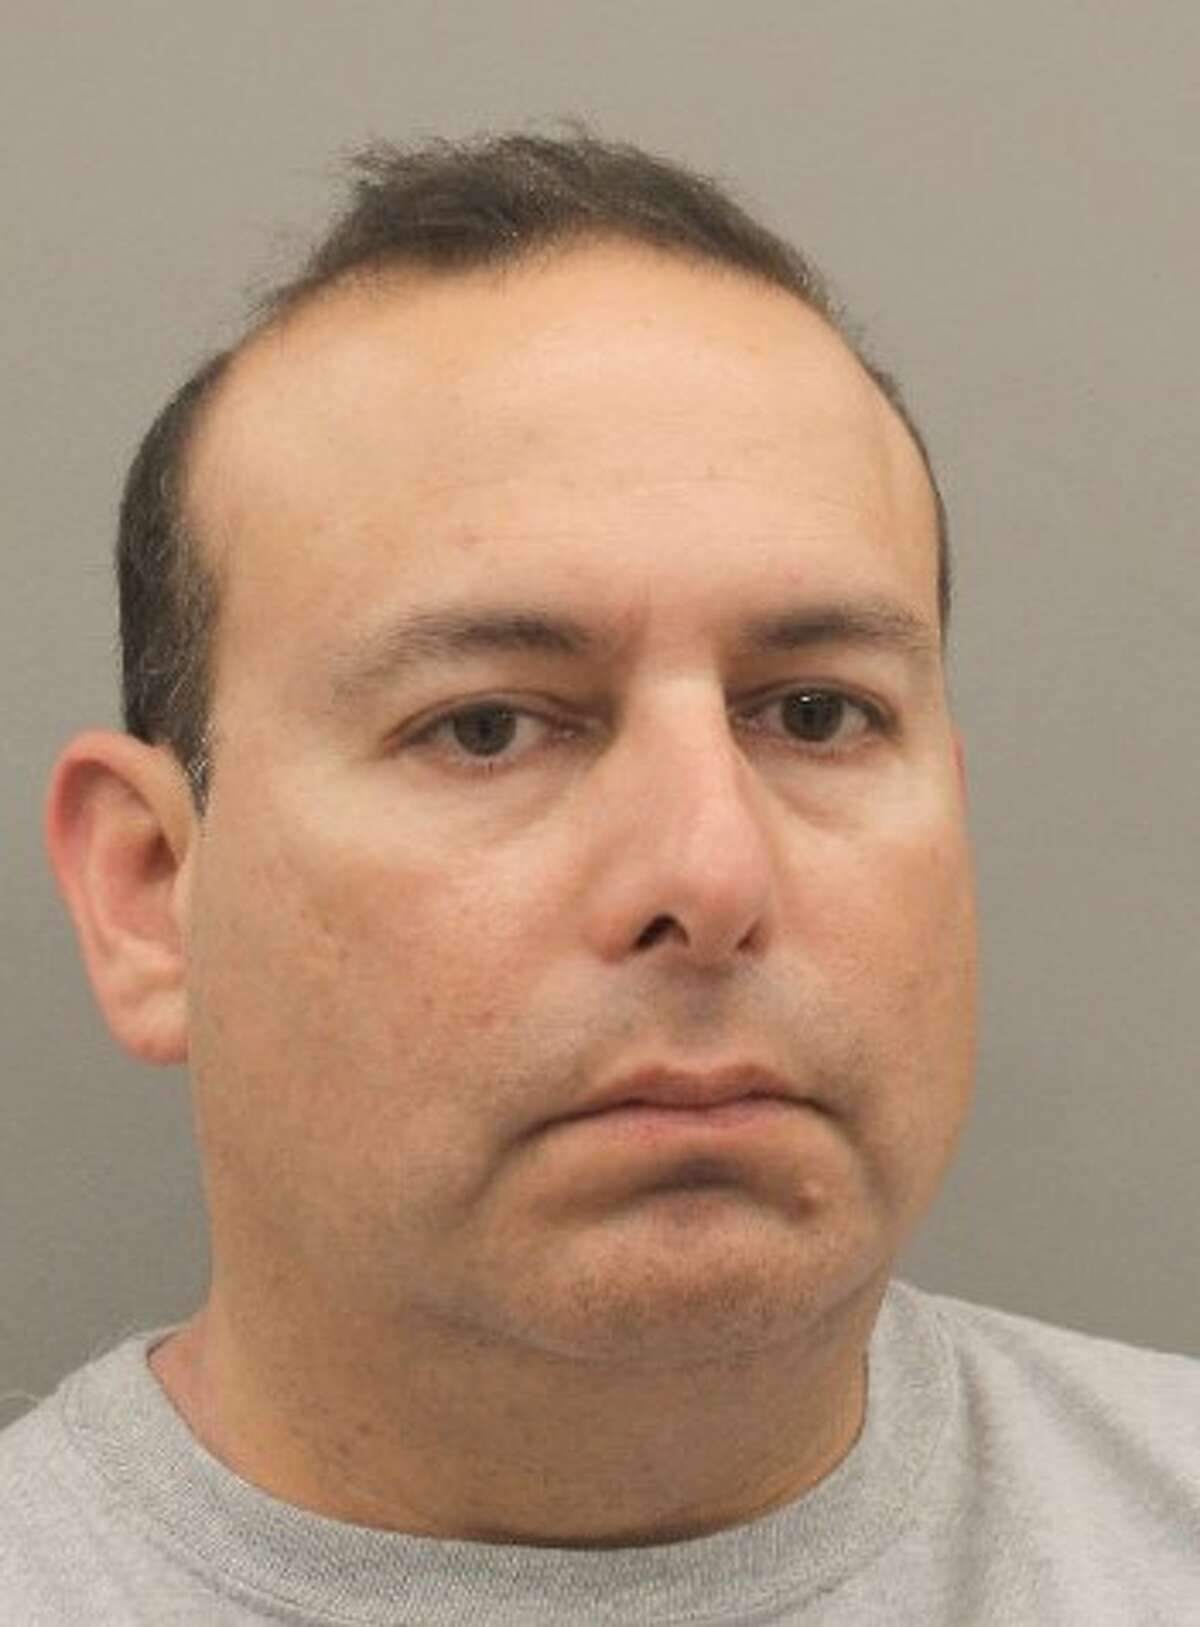 Hector Arturo Campos, 48, was convicted earlier this week of murder for fatally shooting 53-year-old Ana Weed in January 2017 outside her home in the 3400 block of Mourning Dove in Spring. 